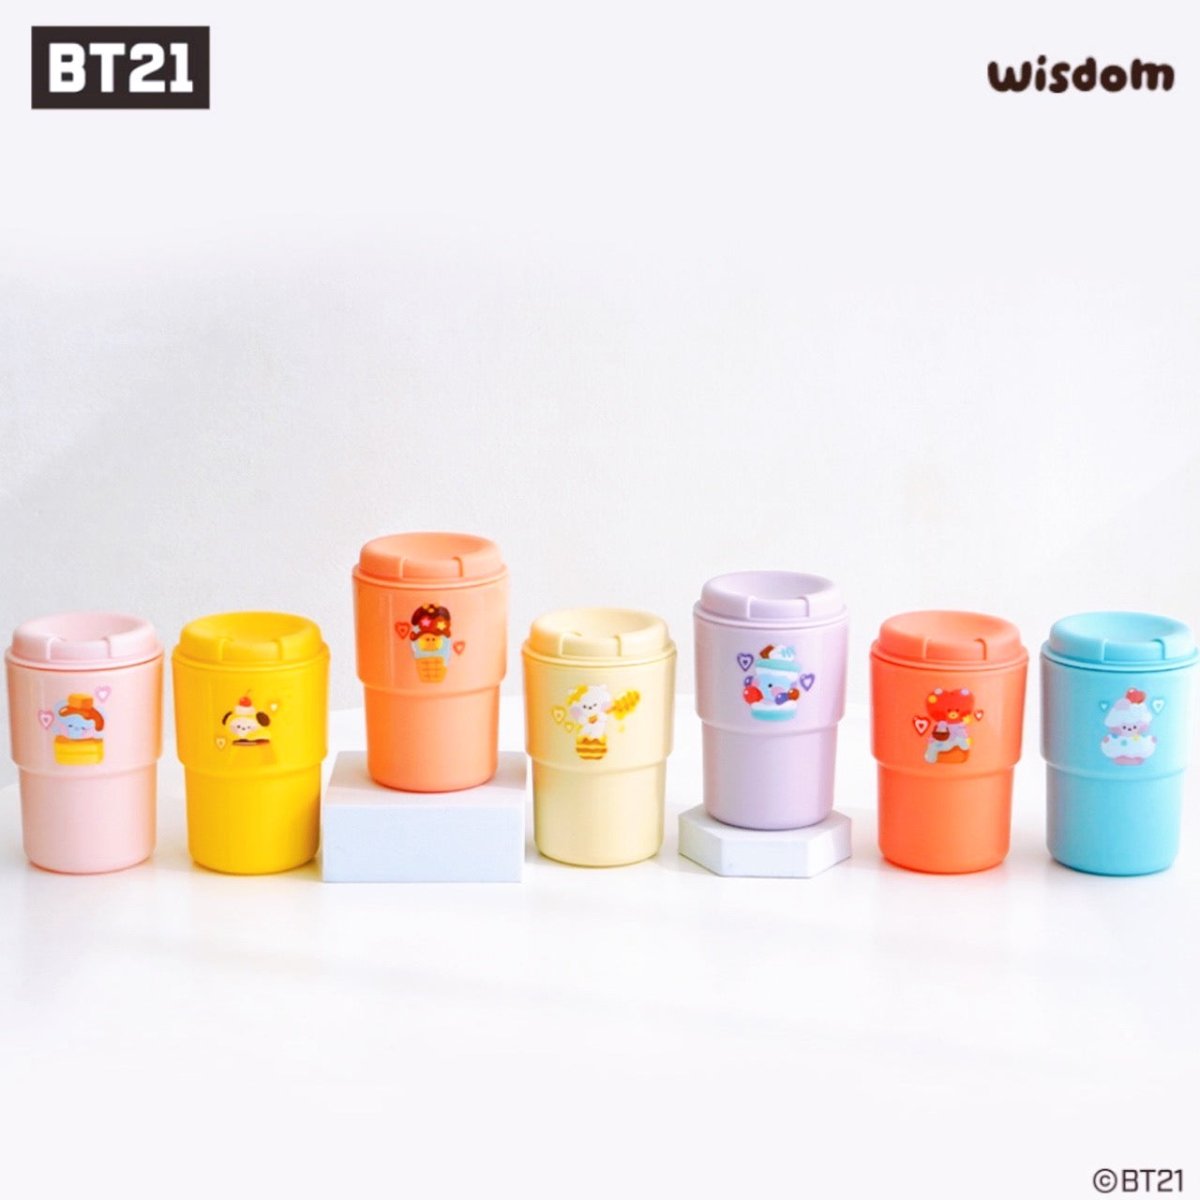 🎉GOOD BYE WINTER SALE BT21 Baking Cup Php 680 + LSF 📩 DM us to